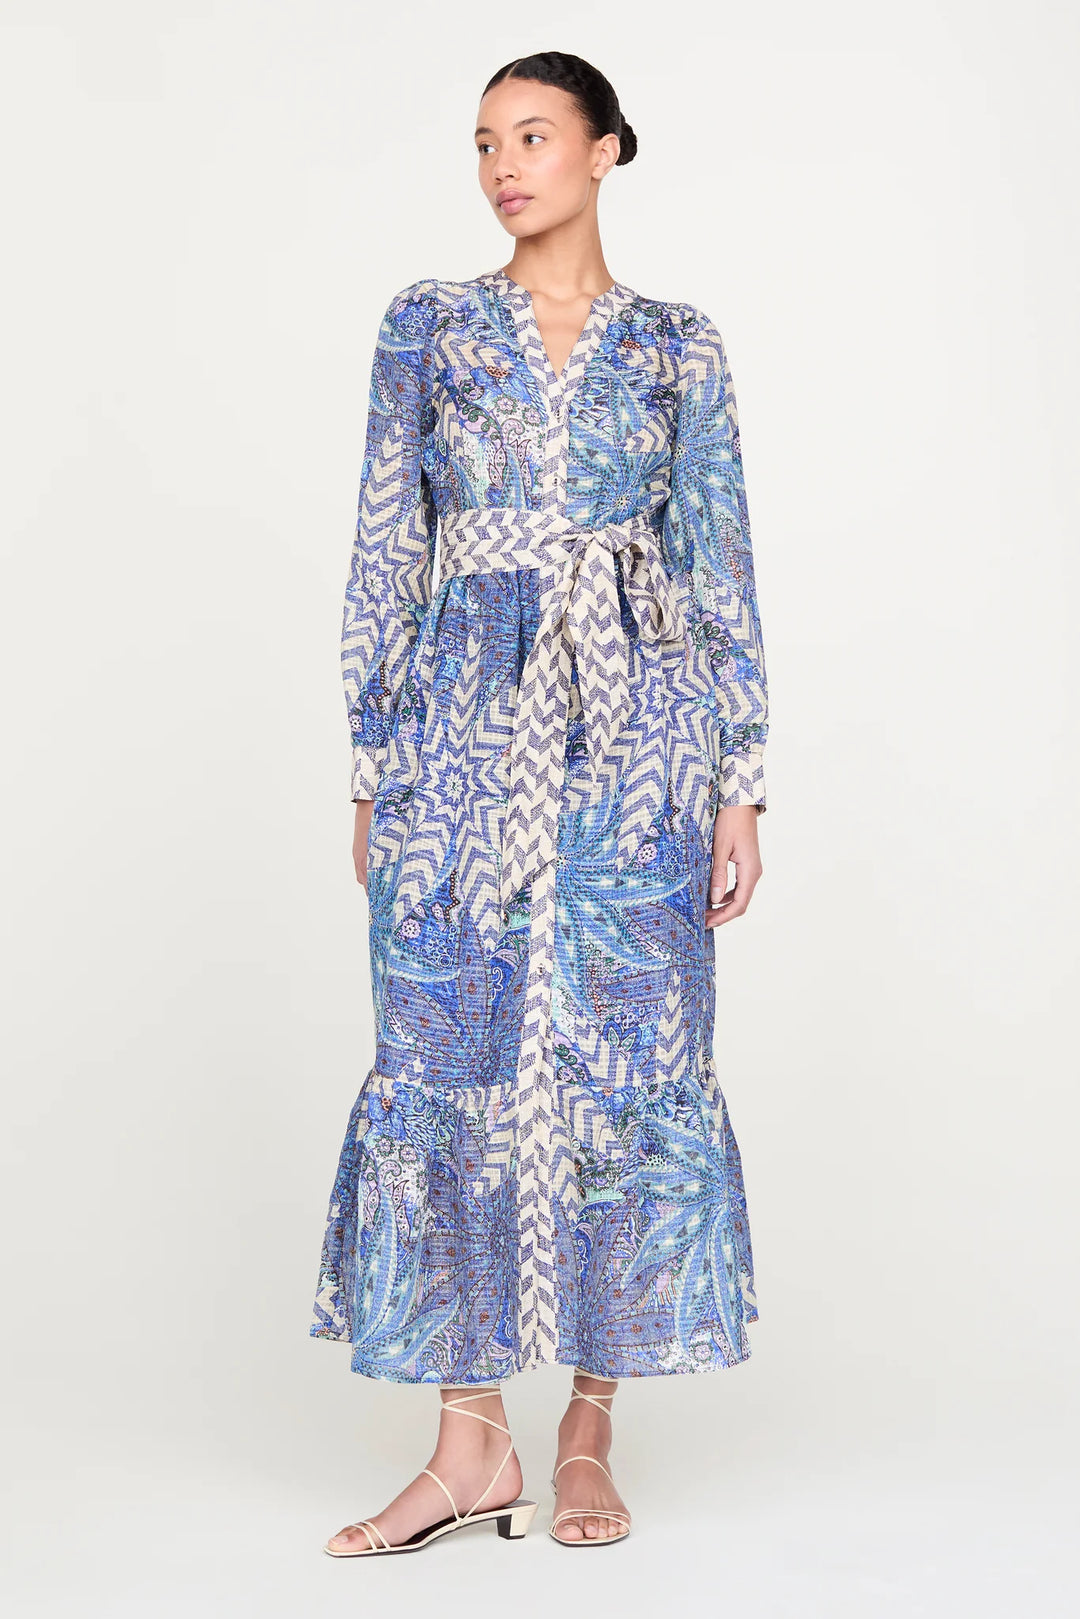 Marie Oliver Hannon Dress | Anise Breeze